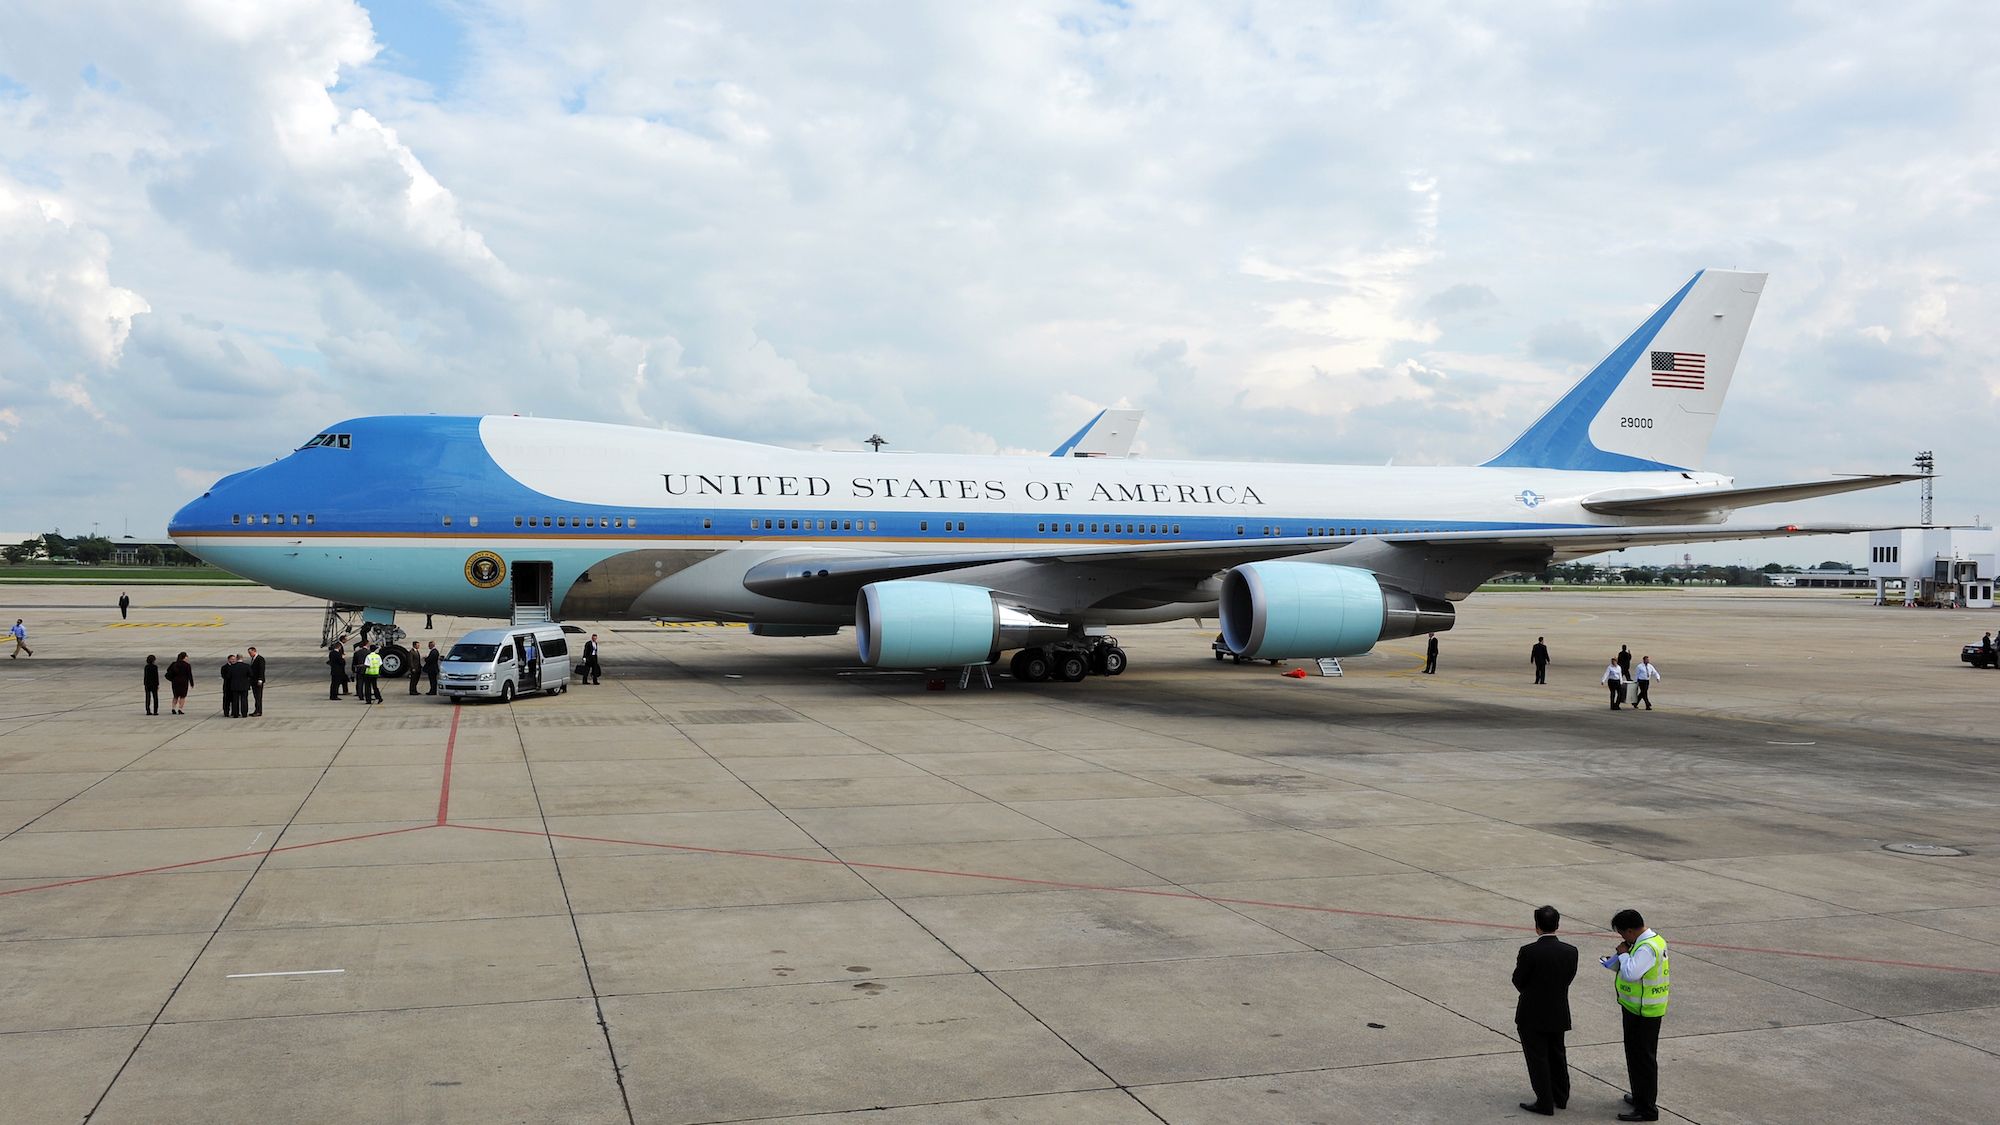 Air Force One parked on tarmac